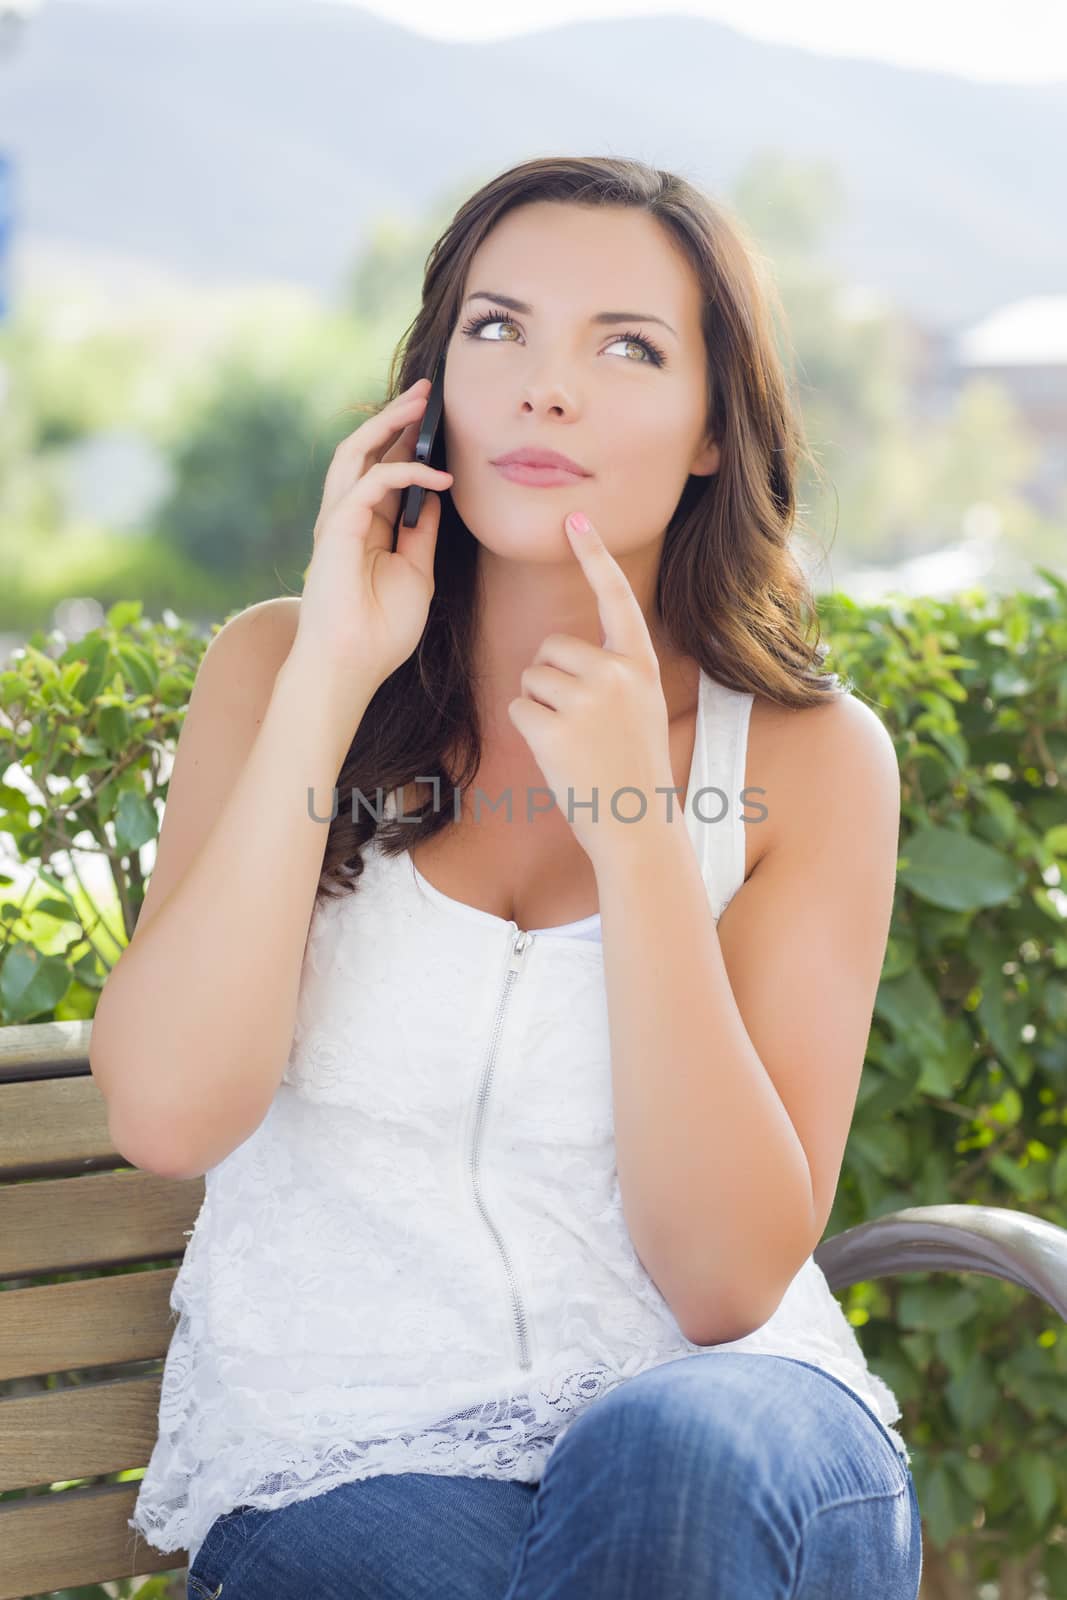 Attractive Contemplative Young Adult Female Talking on Cell Phone Outdoors on Bench.